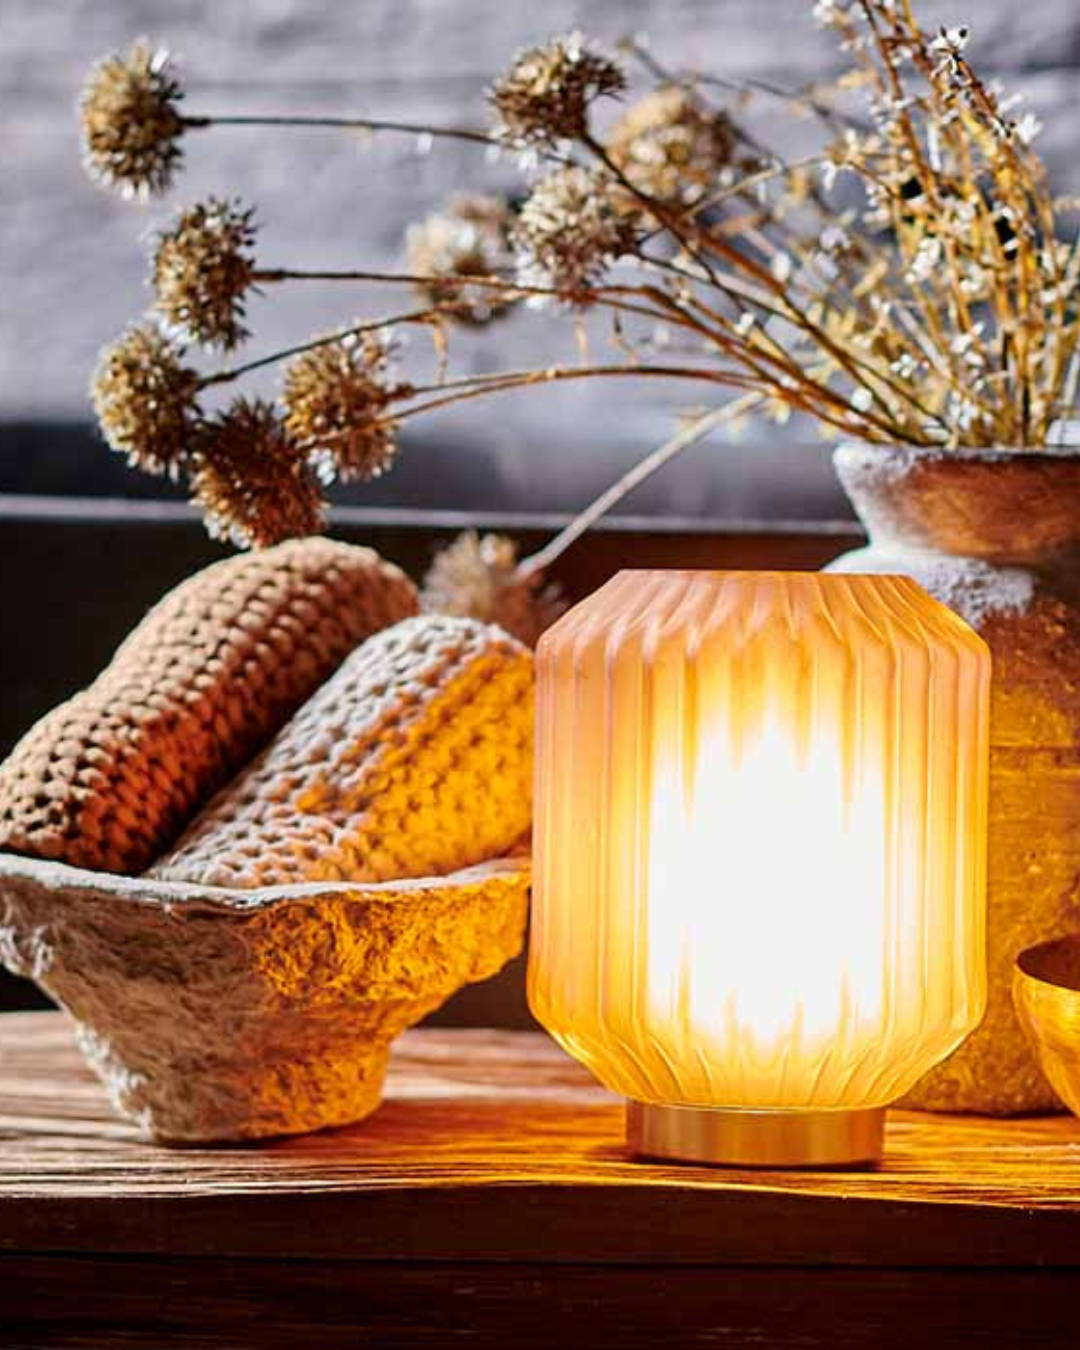 A close up of a glass LED lamp next to some dried flowers and a paper cache bowl filled with waffle textured flannels